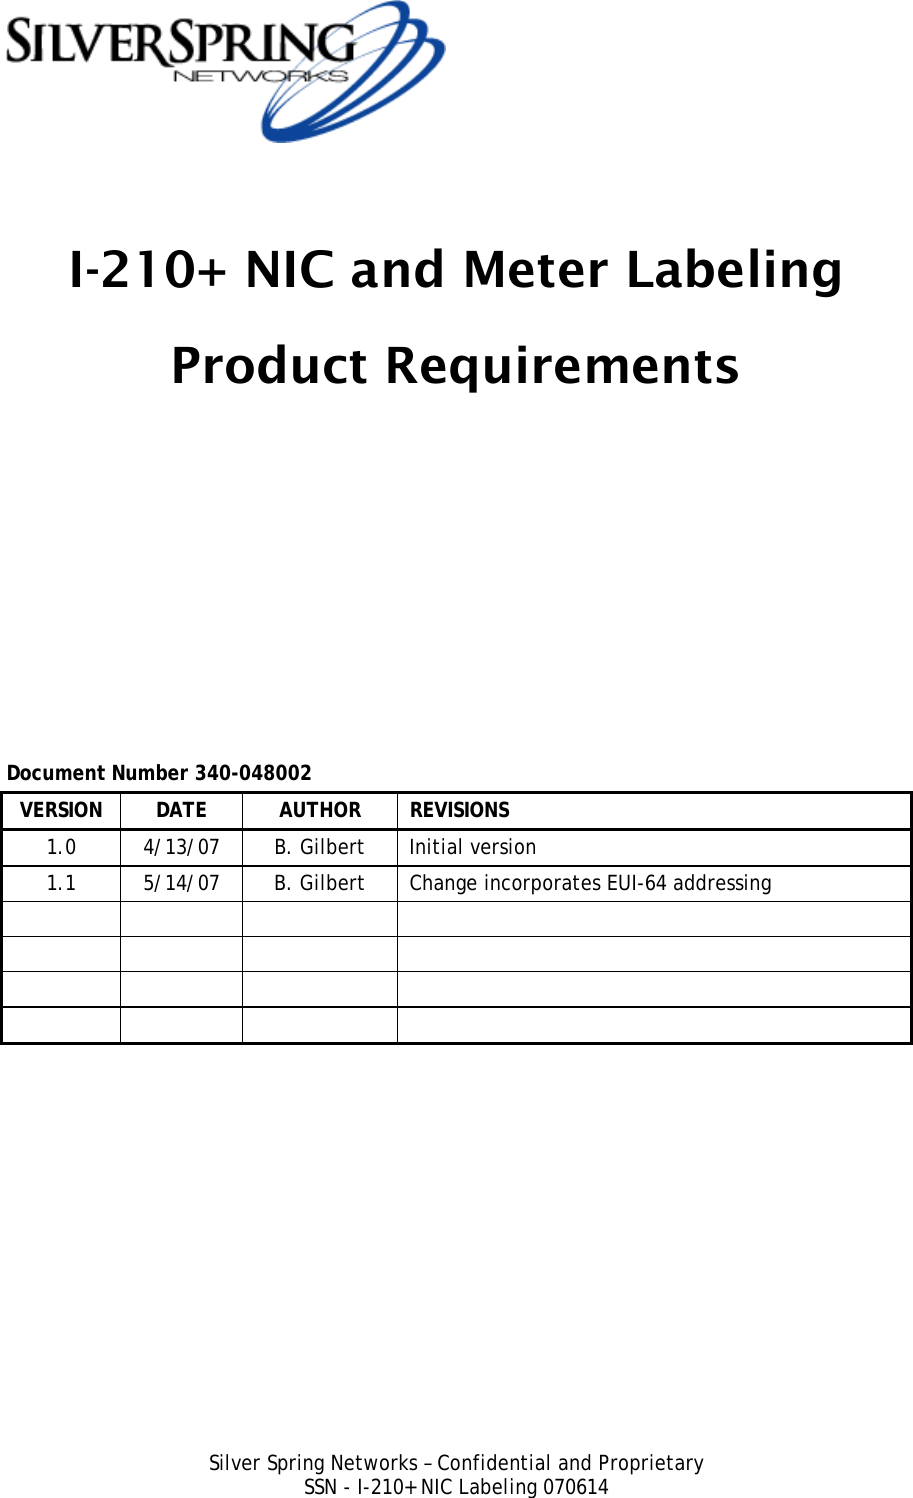  Silver Spring Networks – Confidential and Proprietary SSN - I-210+ NIC Labeling 070614  I-210+ NIC and Meter Labeling Product Requirements                Document Number 340-048002 VERSION DATE  AUTHOR REVISIONS 1.0  4/13/07  B. Gilbert  Initial version 1.1  5/14/07  B. Gilbert  Change incorporates EUI-64 addressing                      